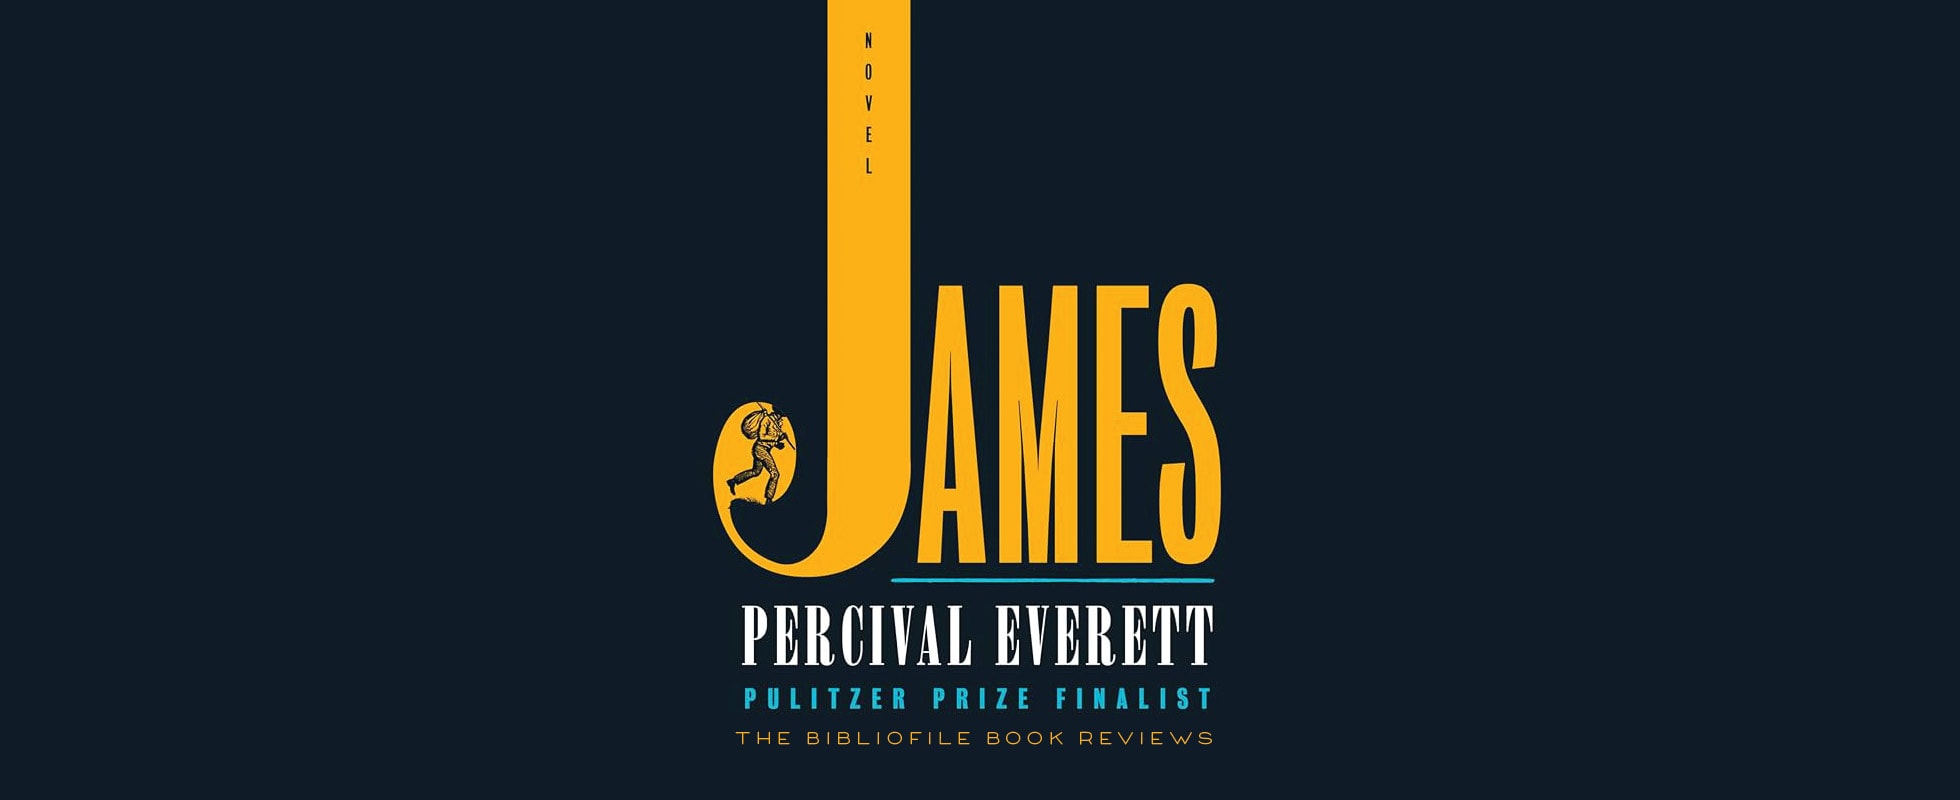 james by percival everett book review plot summary synopsis recap discussion questions spoilers analysis